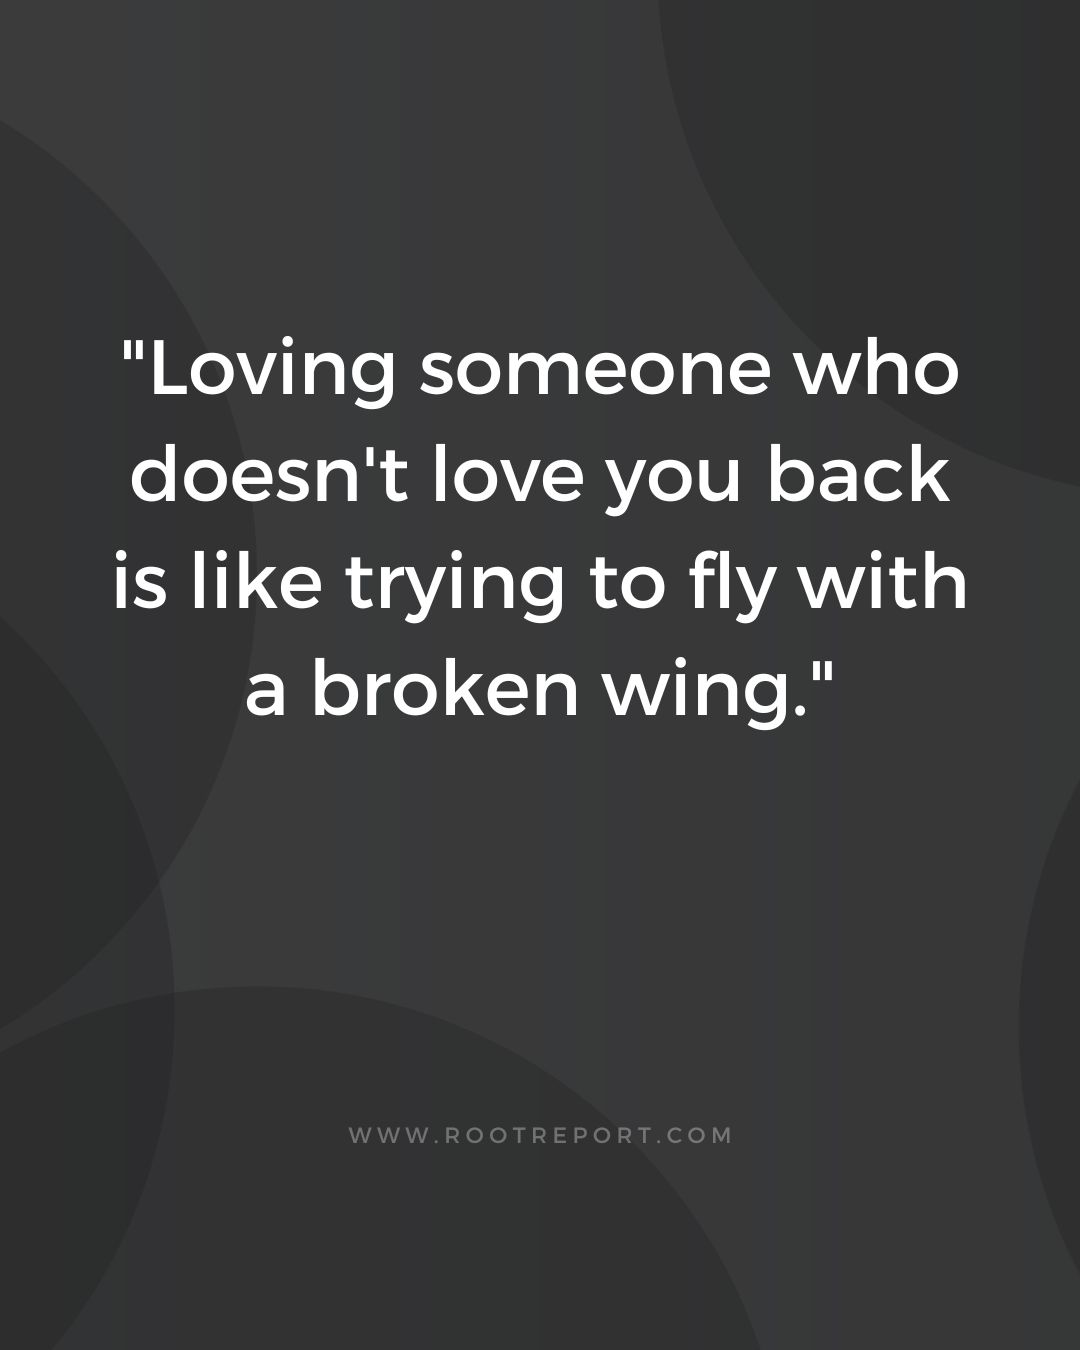 75+ One Sided Love Quotes and Captions [With Images]